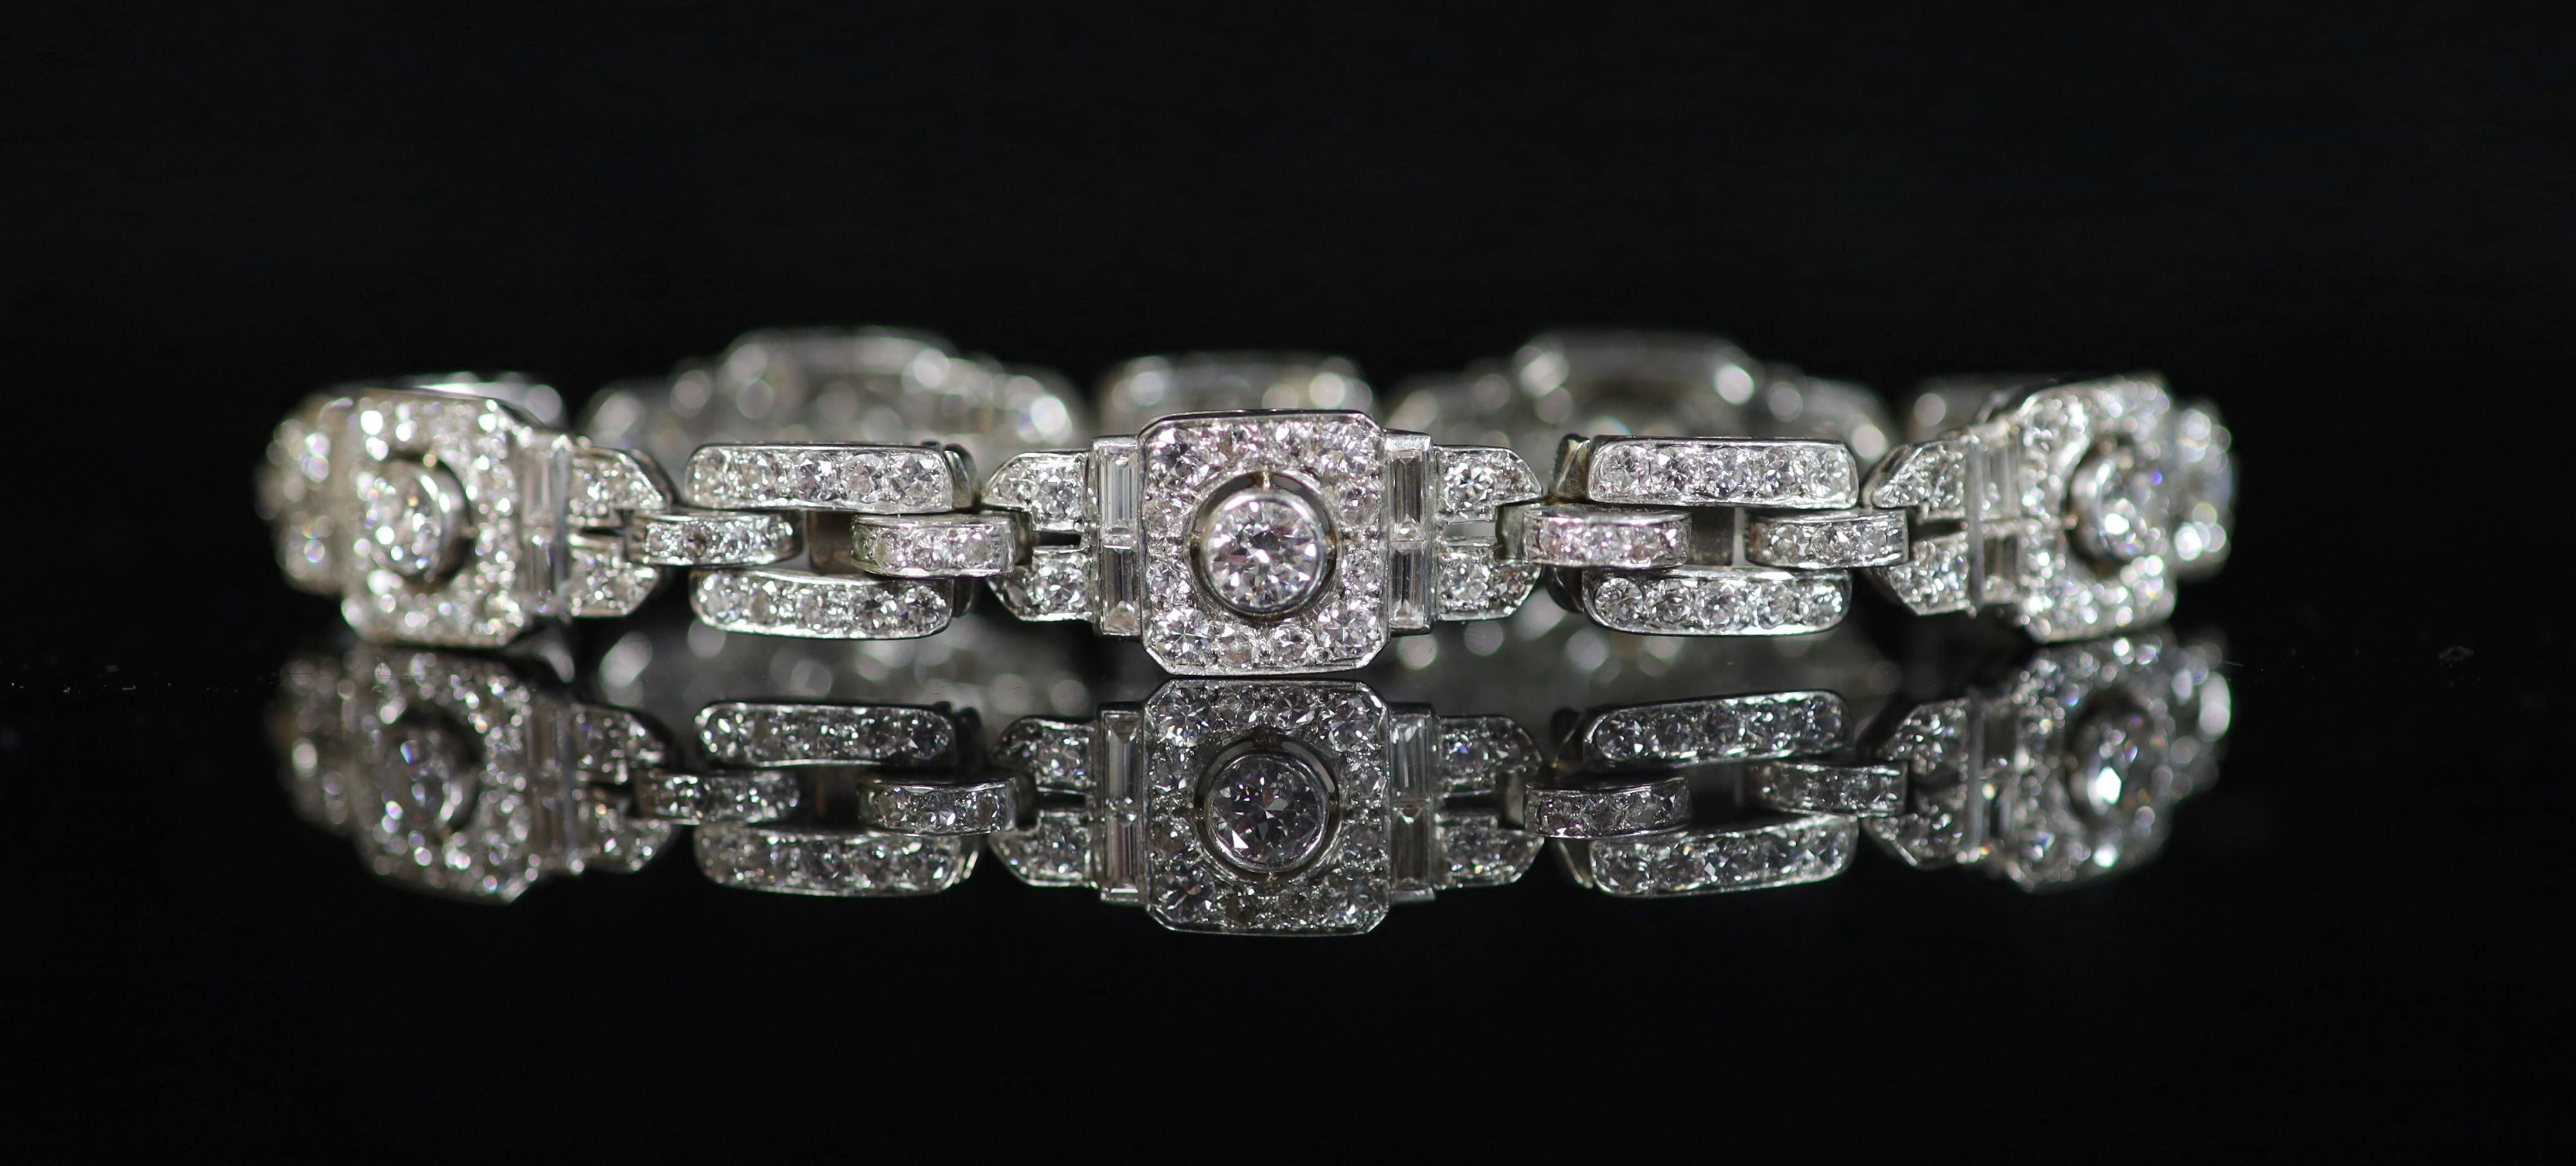 A mid 20th century platinum and diamond encrusted rectangular link bracelet,set with round and